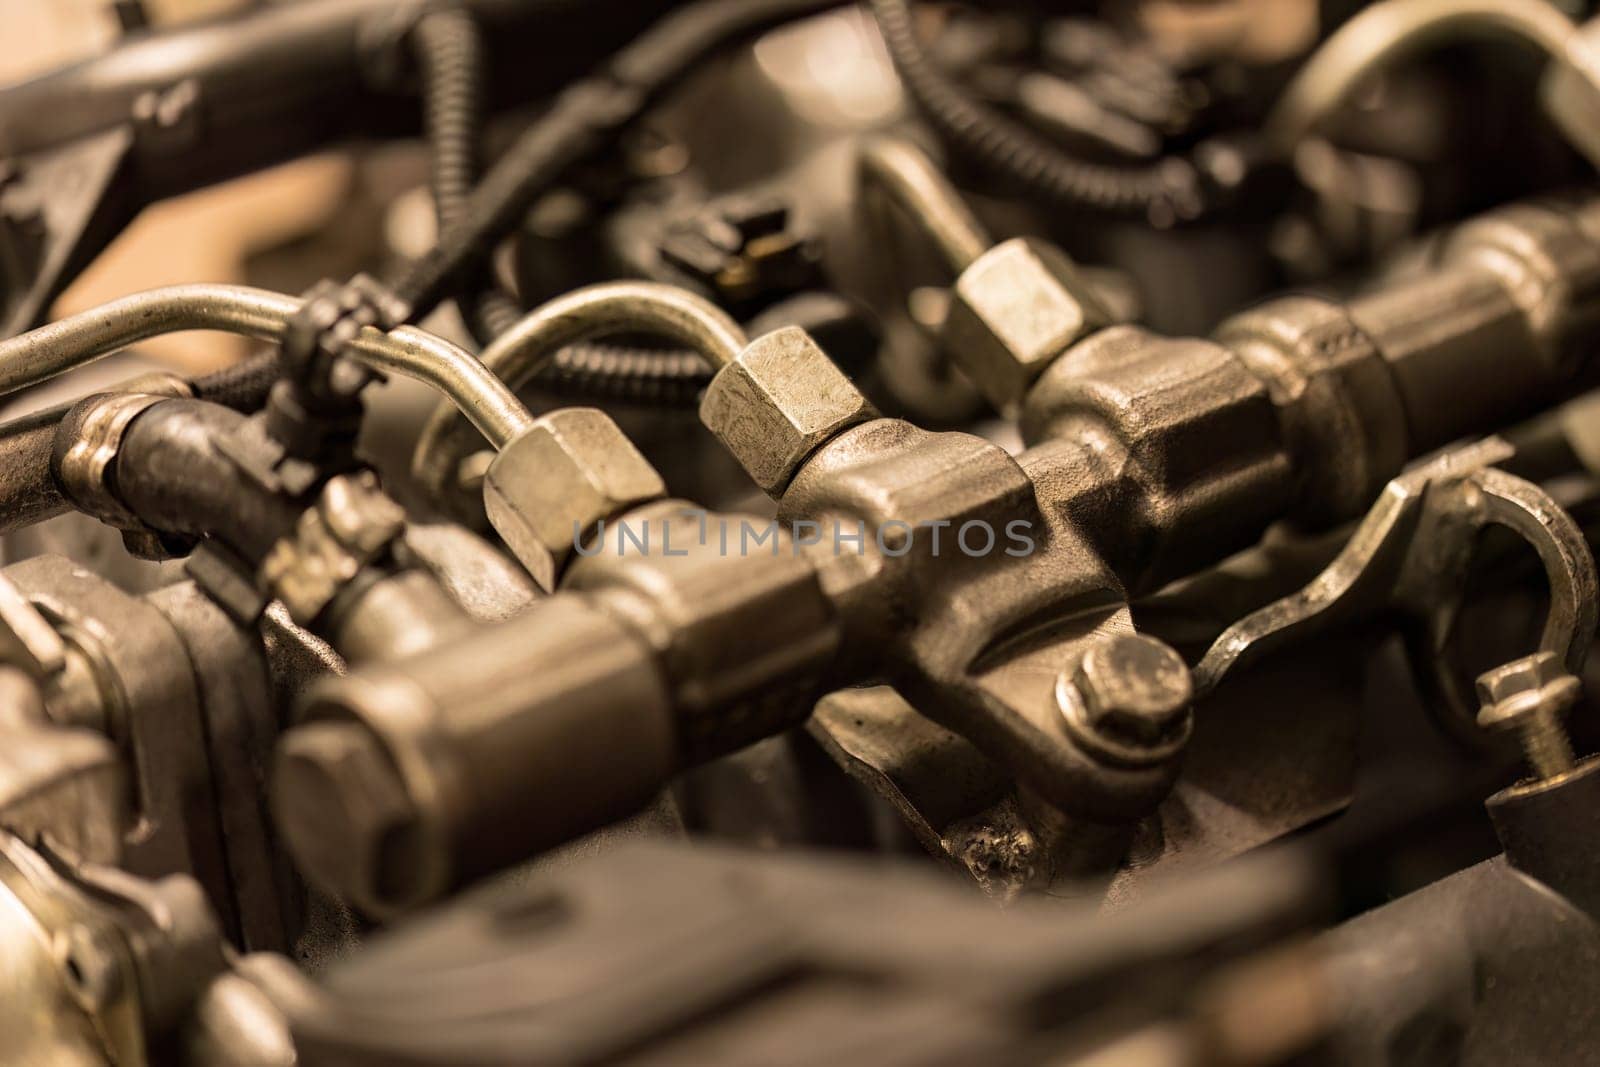 Common Rail Diesel Injectors Detail by pippocarlot